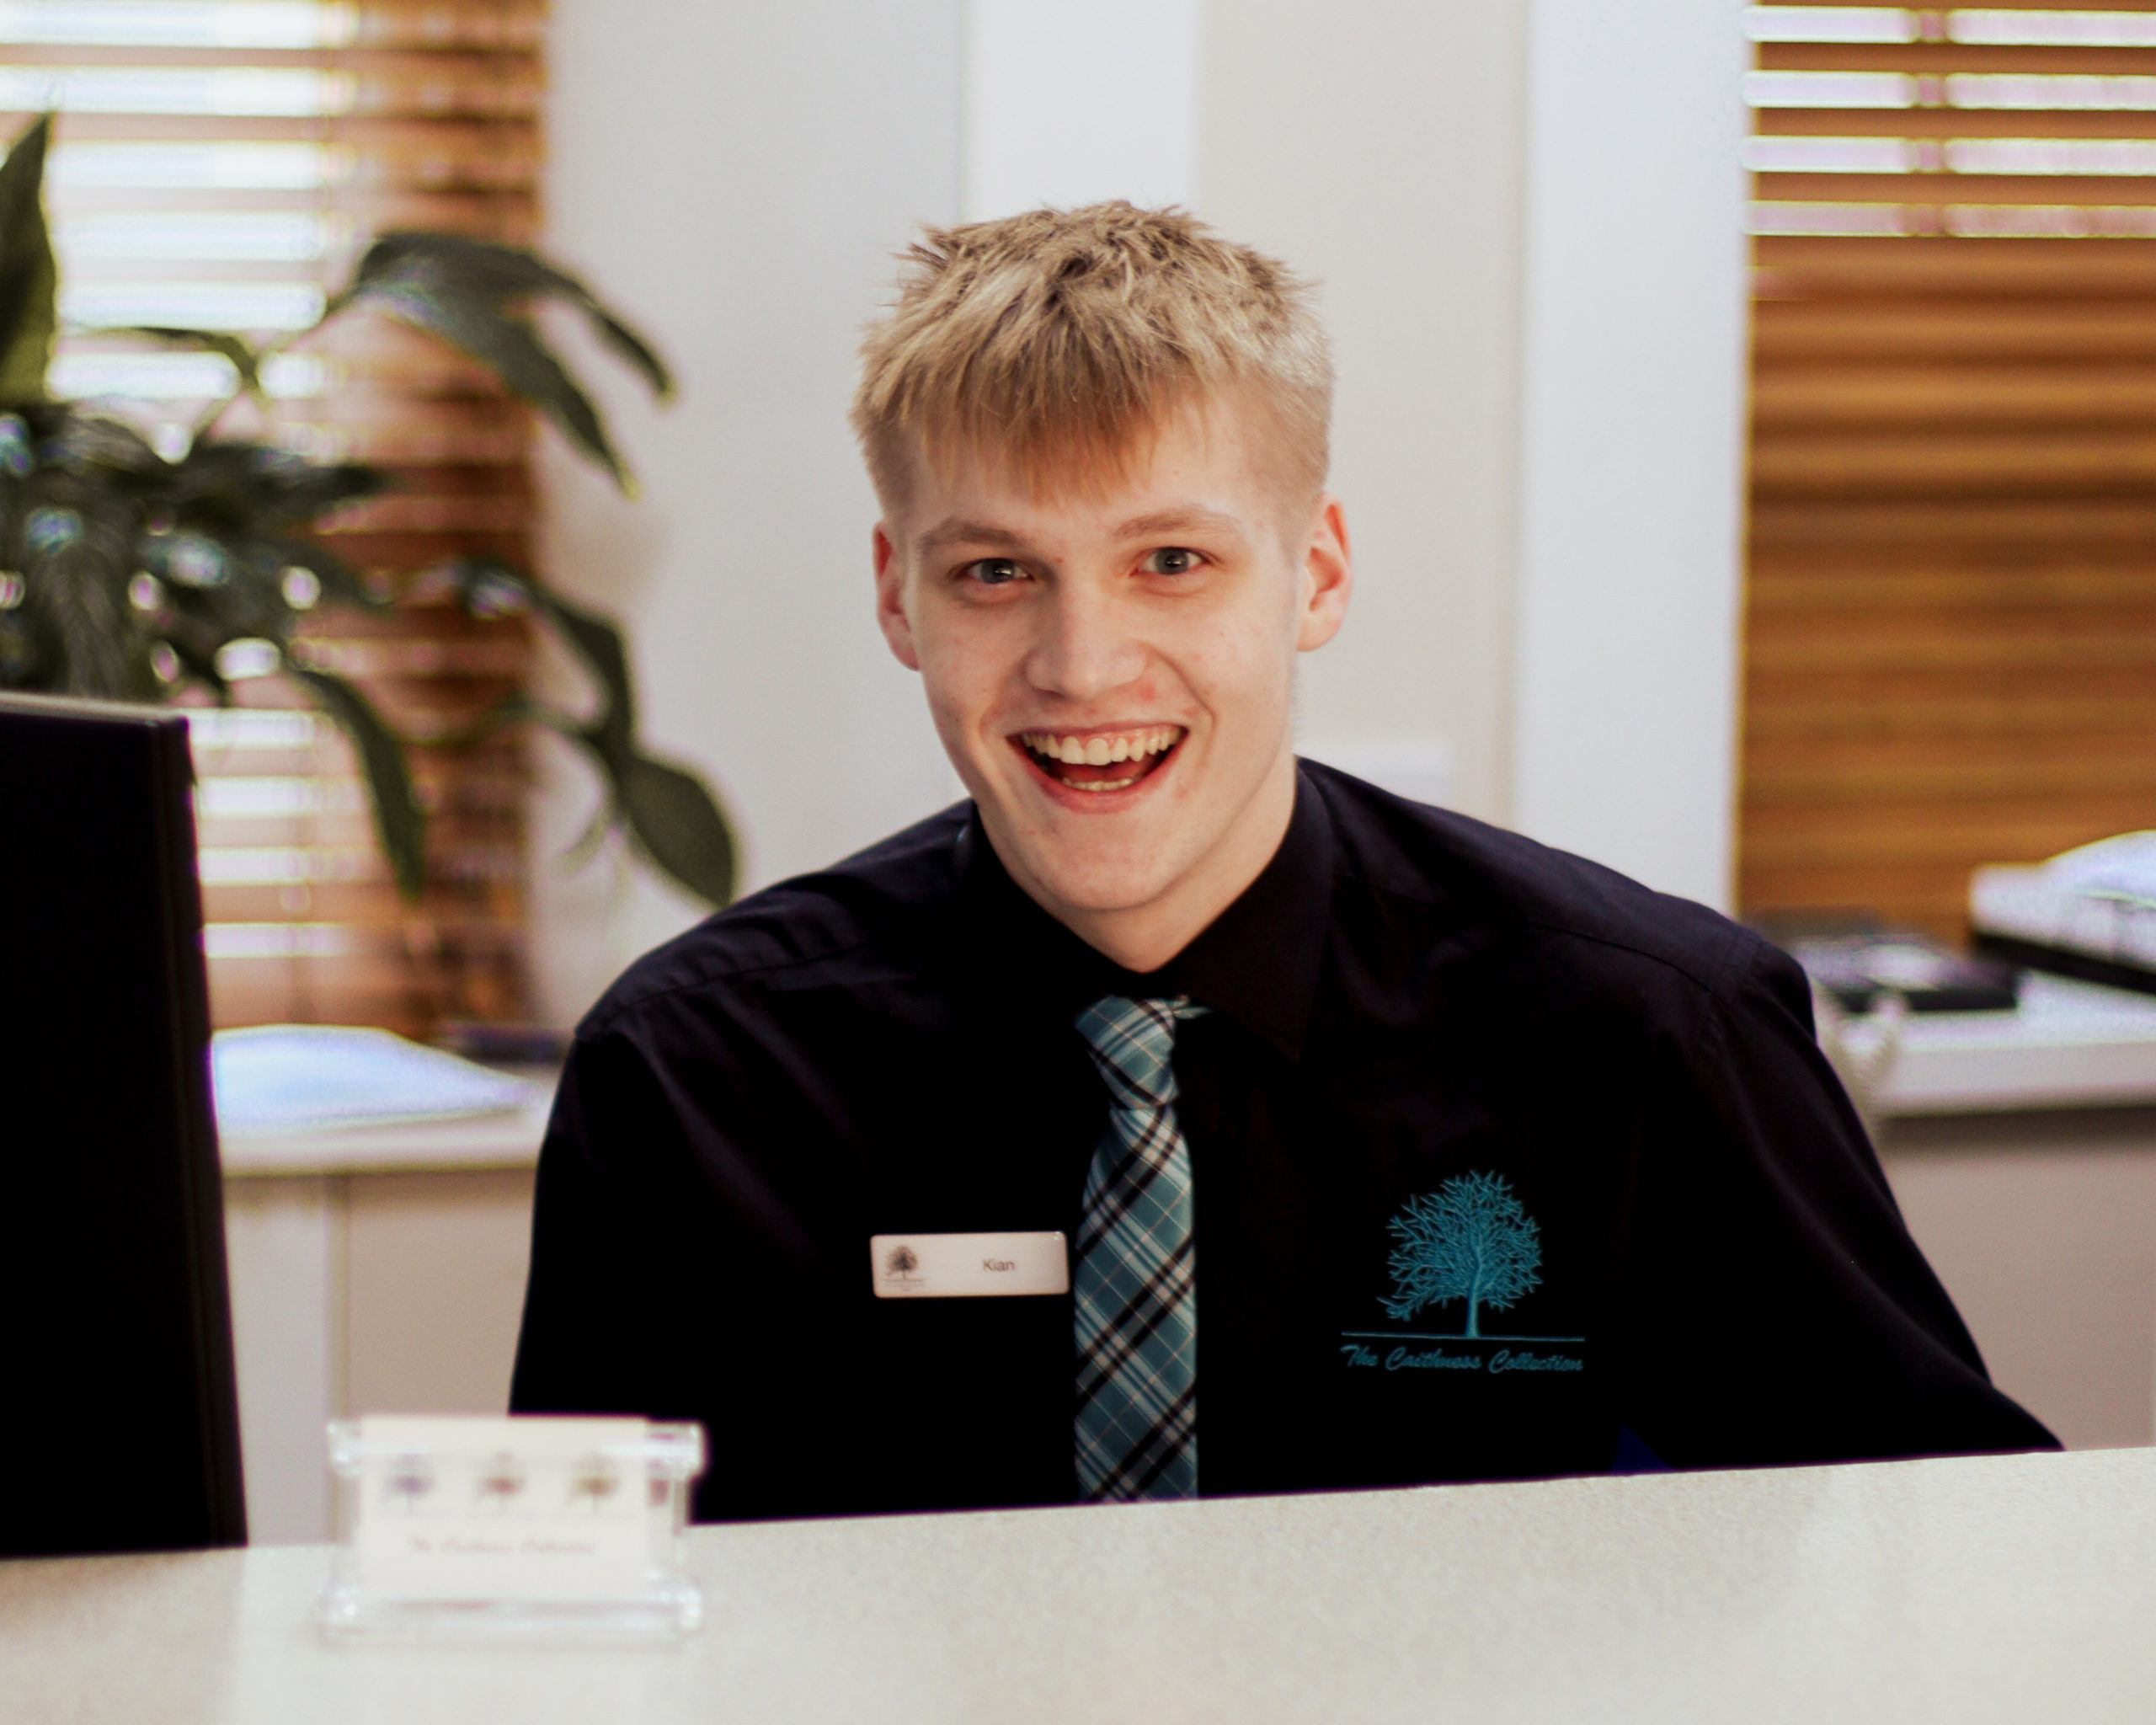 Kian Mackay, Hospitality Supervision and Leadership Apprentice, The Caithness Collection. Images by Niamh Ross Photography.